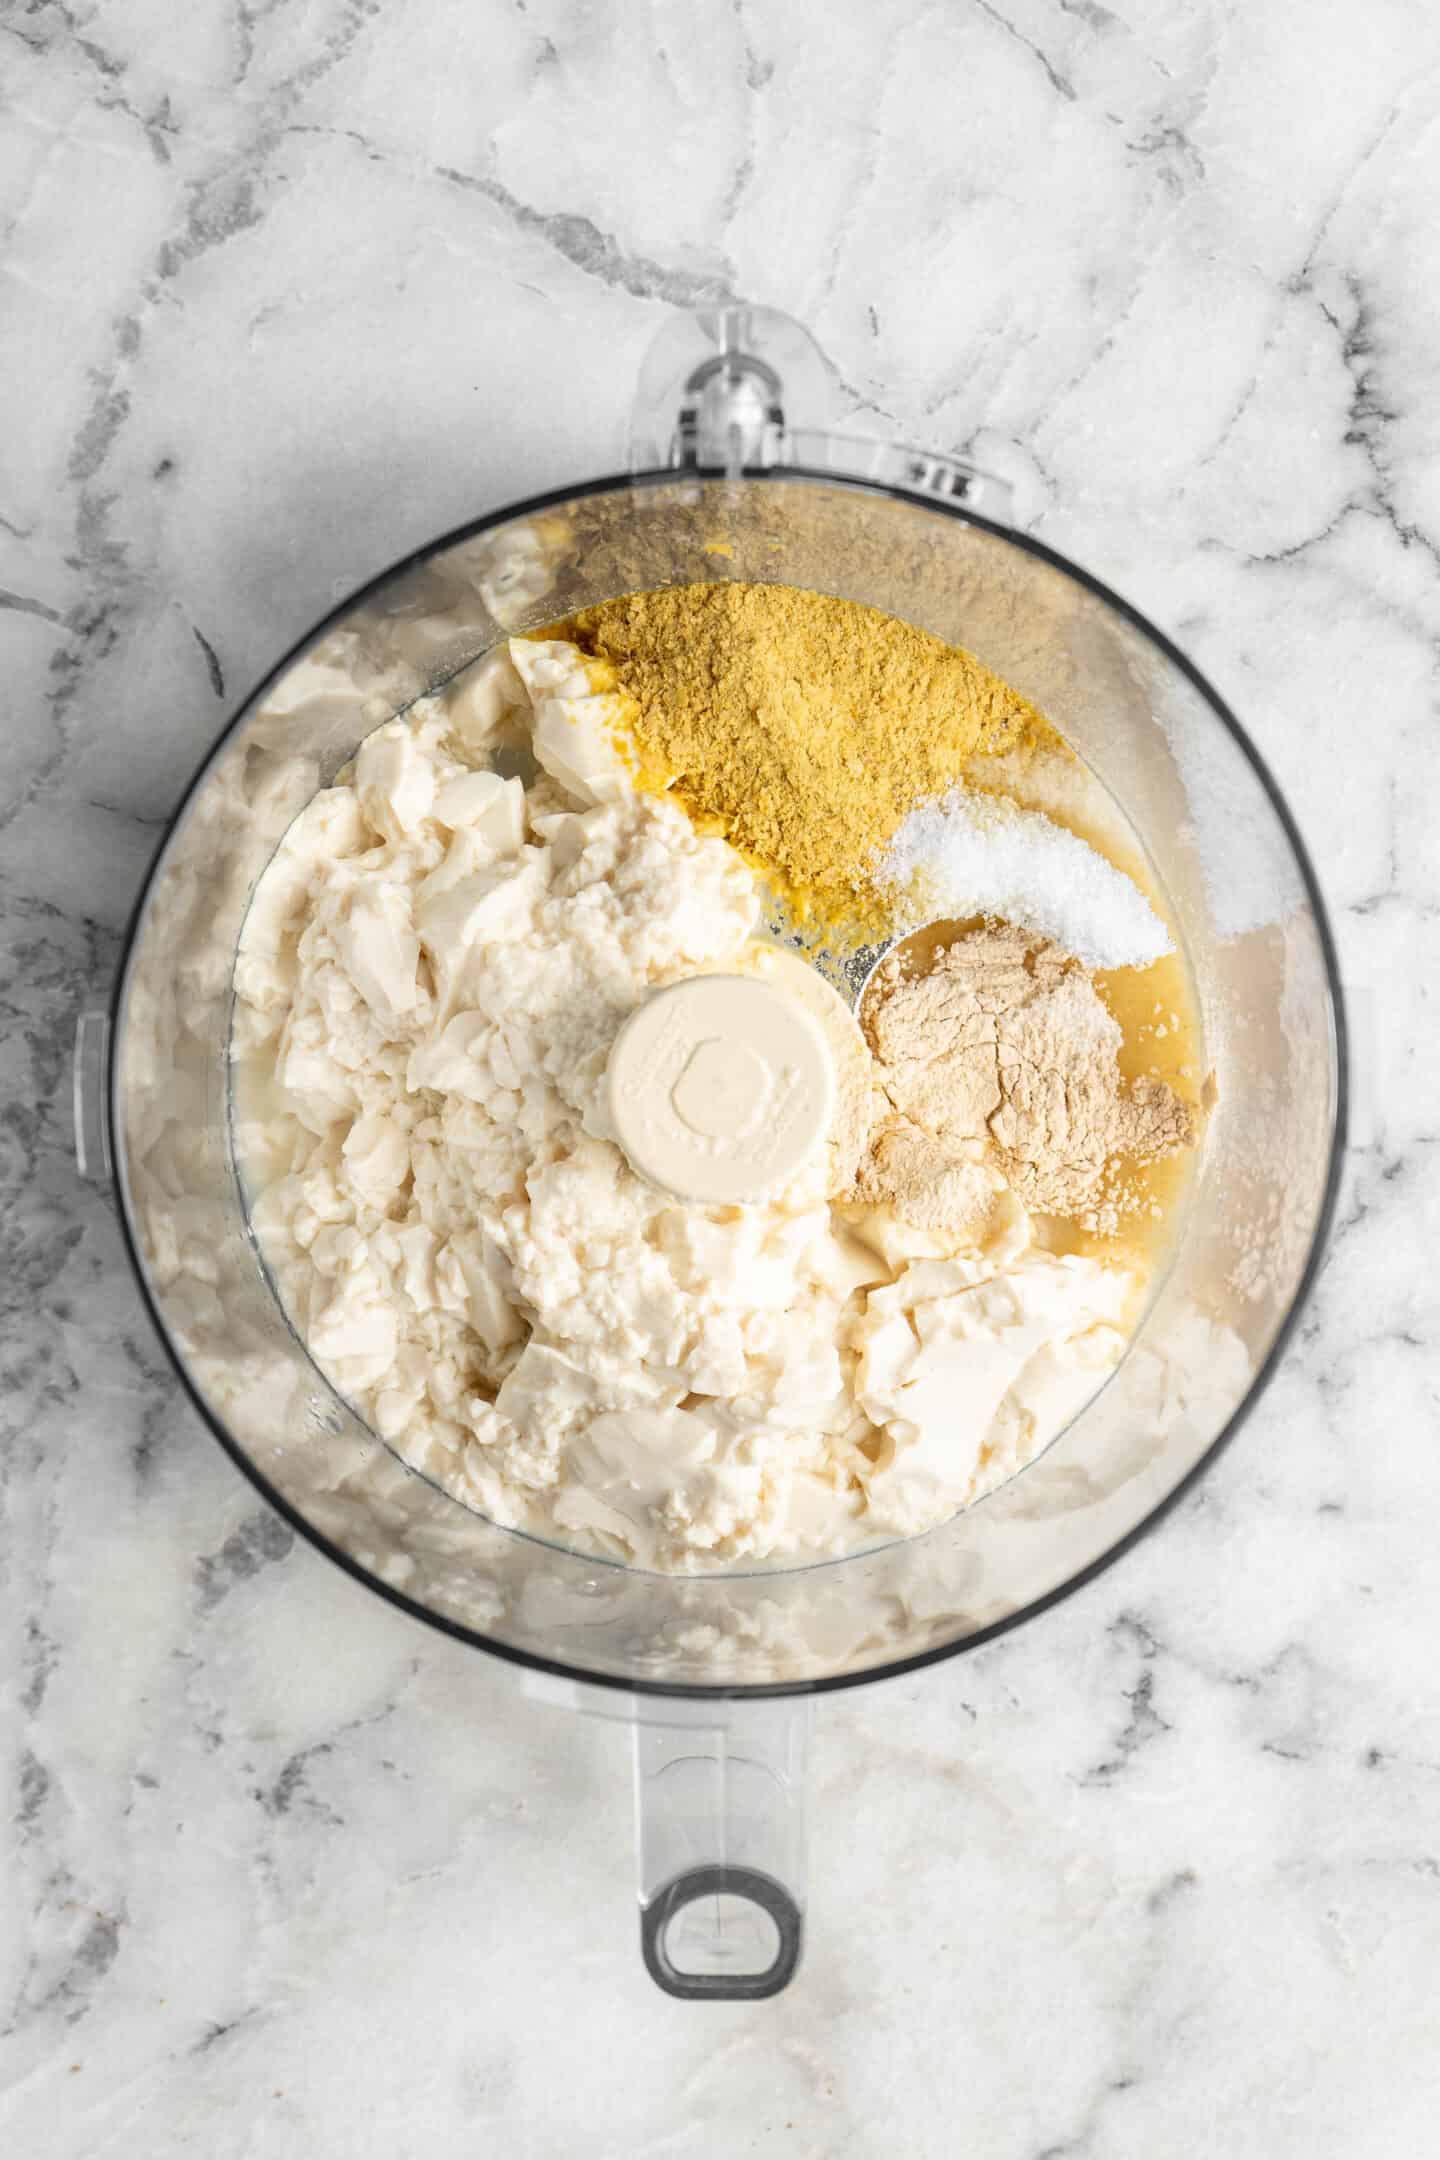 Ingredients for vegan ricotta in a food processor